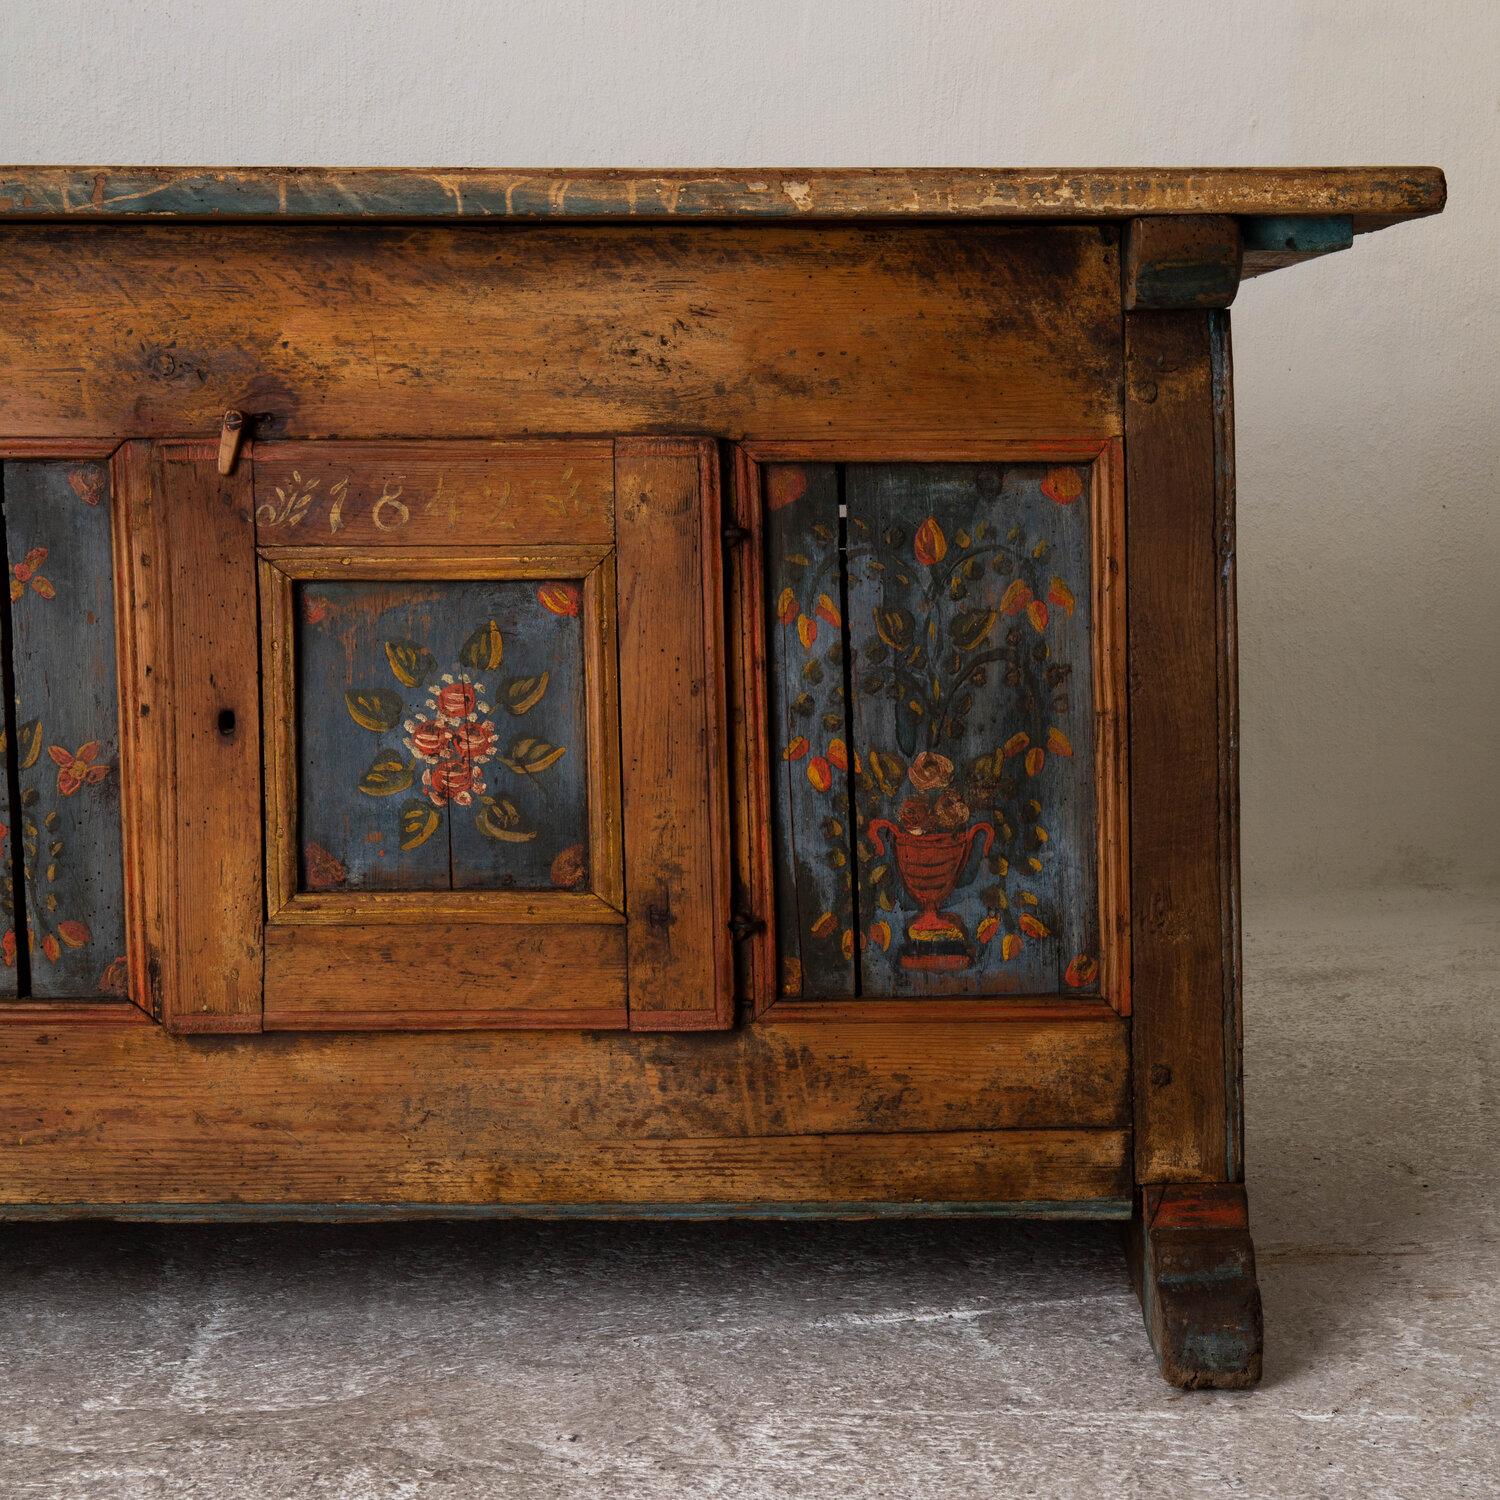 Sideboard Swedish Folk Art floral painting 19th century Sweden. A stunning sideboard made during the 19th Century in Sweden. Original flower details on a pale blue background.